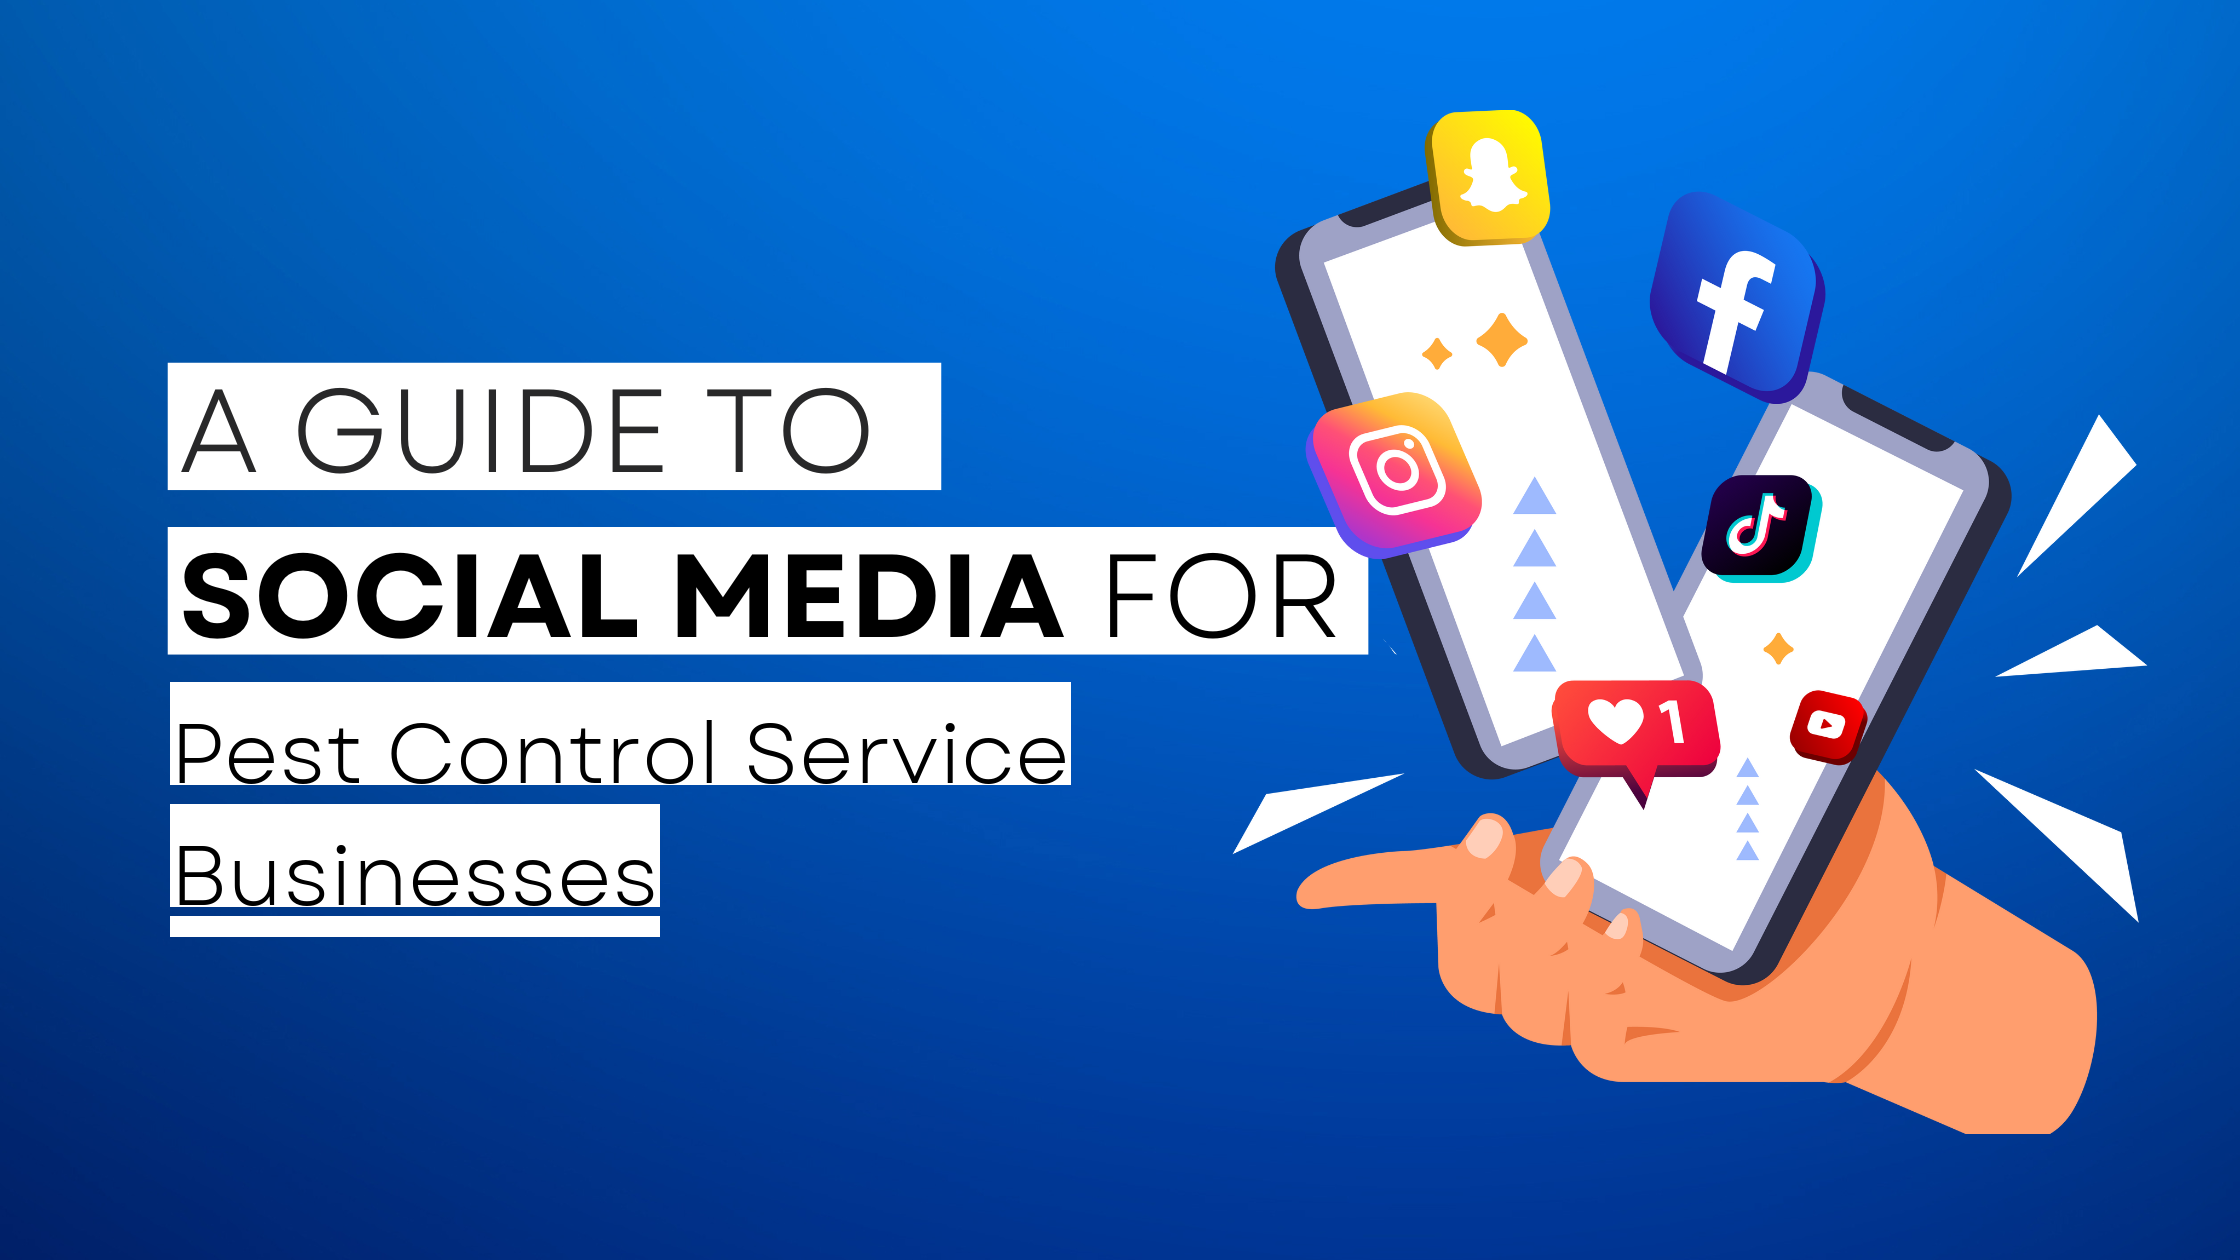 How to start Pest Control Service  on social media